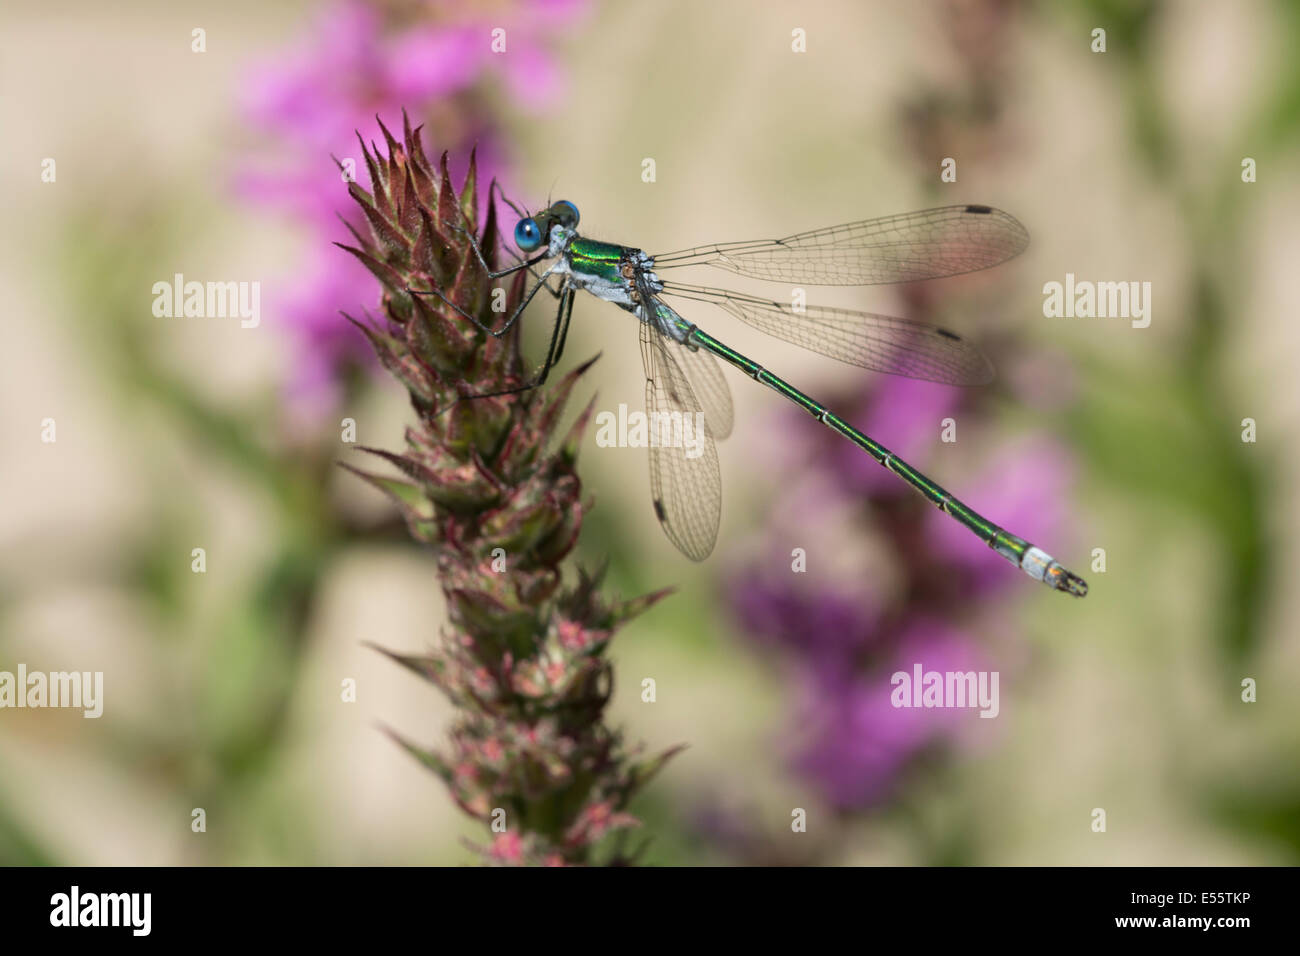 An Emerald Damselfly, Lestes Sponsa, resting on a flower stem at the RSPB Fairburn Ings Nature Reserve Stock Photo